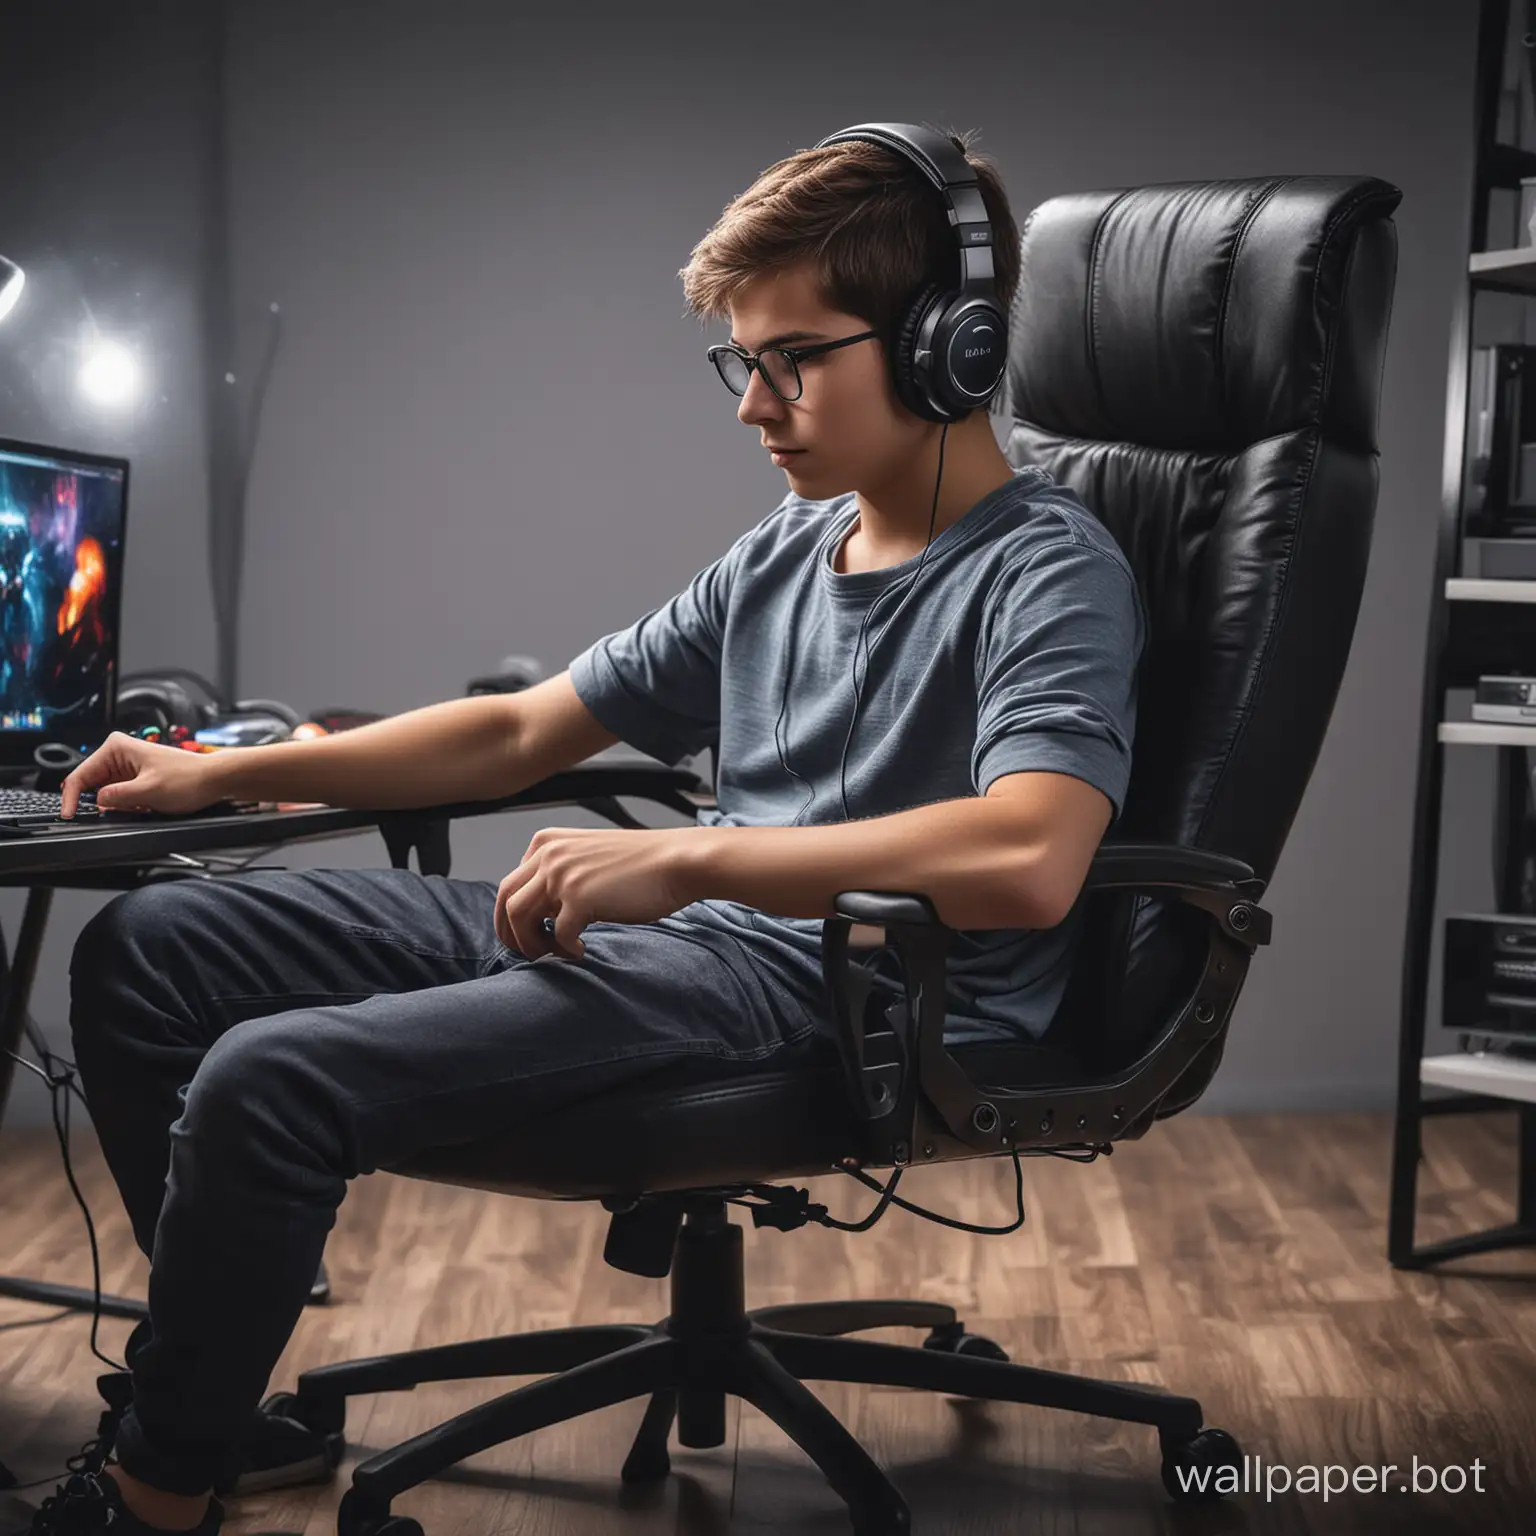 Boy-Gaming-on-PC-with-Headphones-4K-HD-Laptop-Wallpaper